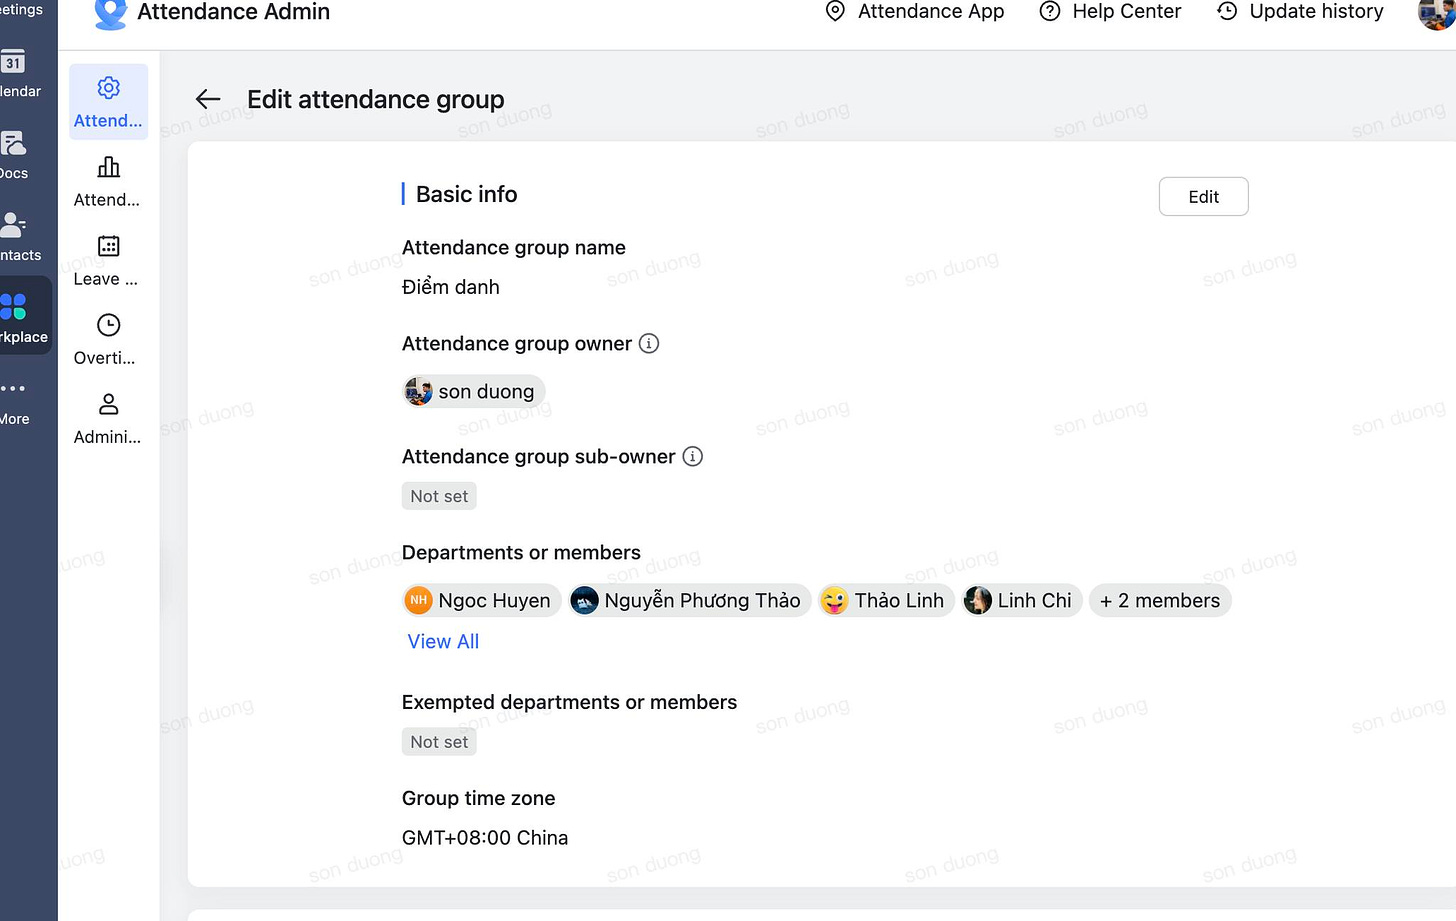 May be an image of text that says 'etings Attendance Admin 31 endar Attend... ocs Edit attendance group Attendance App 血 Attend... Help Center ta 用 Update history Basic info Leave son.duong kplace son Attendance duong Điểm danh Overti... name dưỡng More Edit Attendance group owner Admini... duỡng son duong son duỡng Attendance group sub-owner Not set duong duỡng Departments members luong Ngoc Huyen View All Nguyễn Phương Thảo duơng Thảo Linh Linh Chi Exempted departments or members Not set members tong duơng Group time zone son GMT+08:00 China dương dưong'